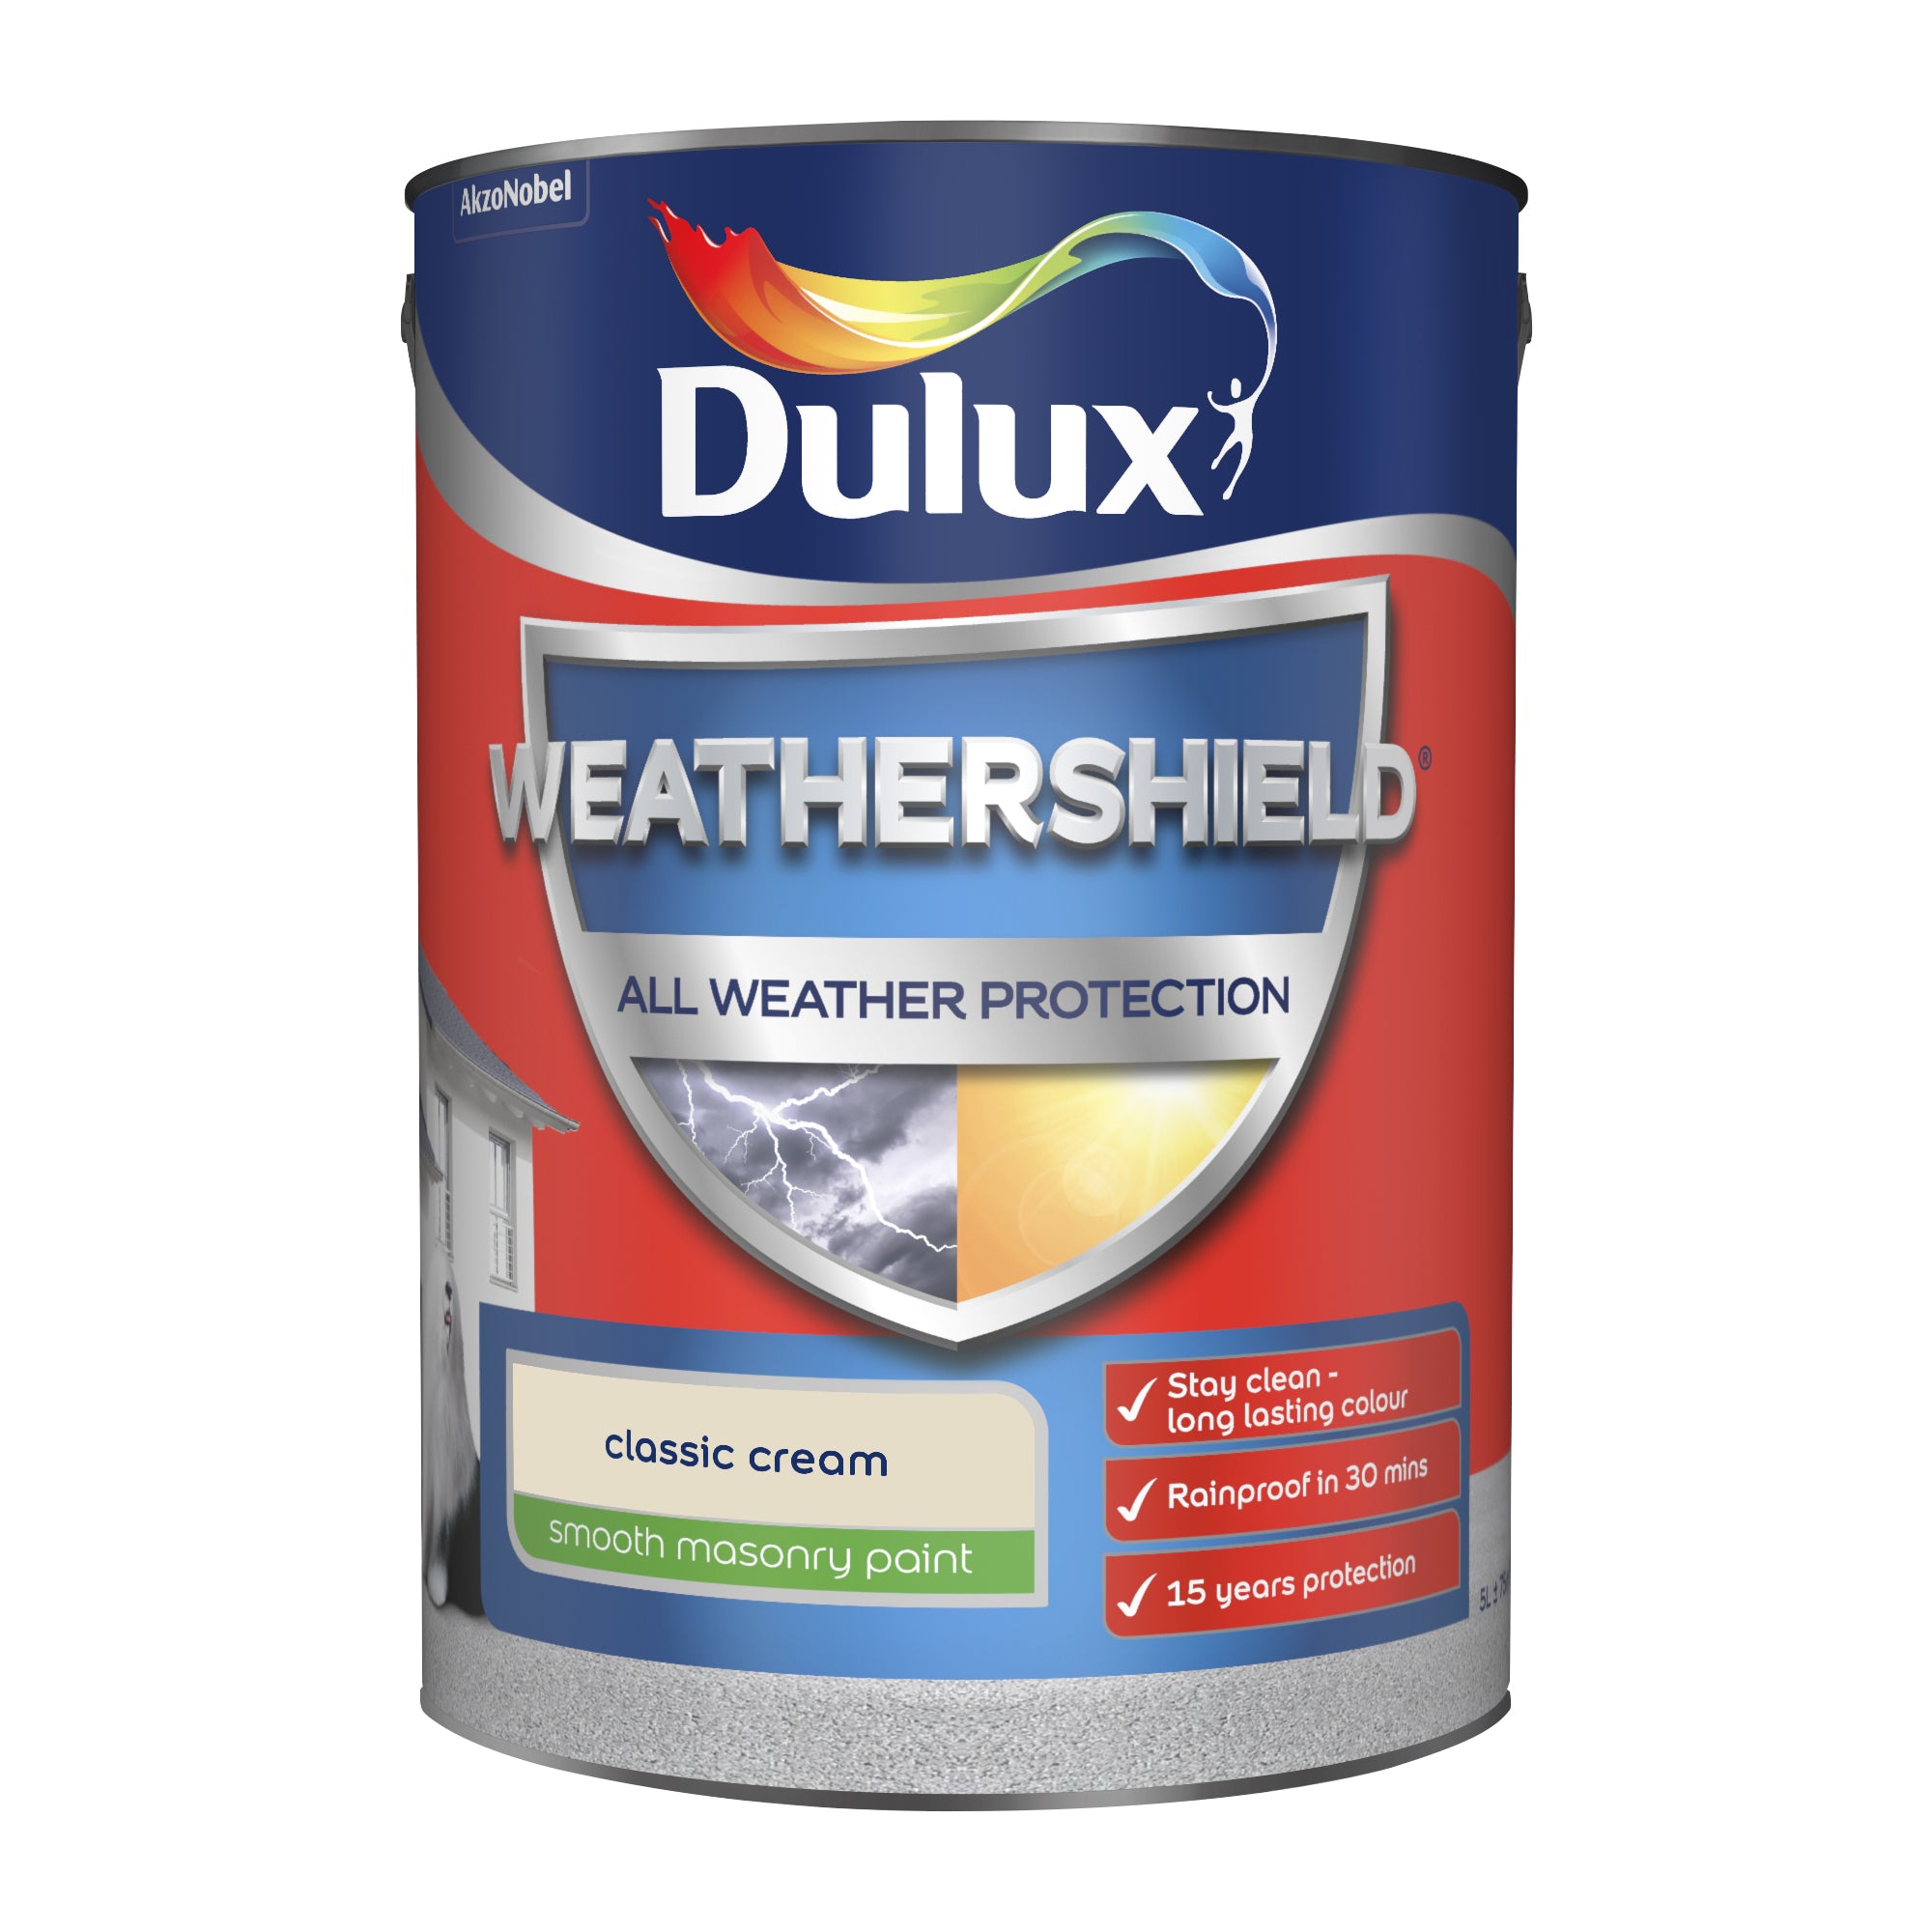 Dulux Weathershield All Weather Protection Smooth Classic Cream 5L